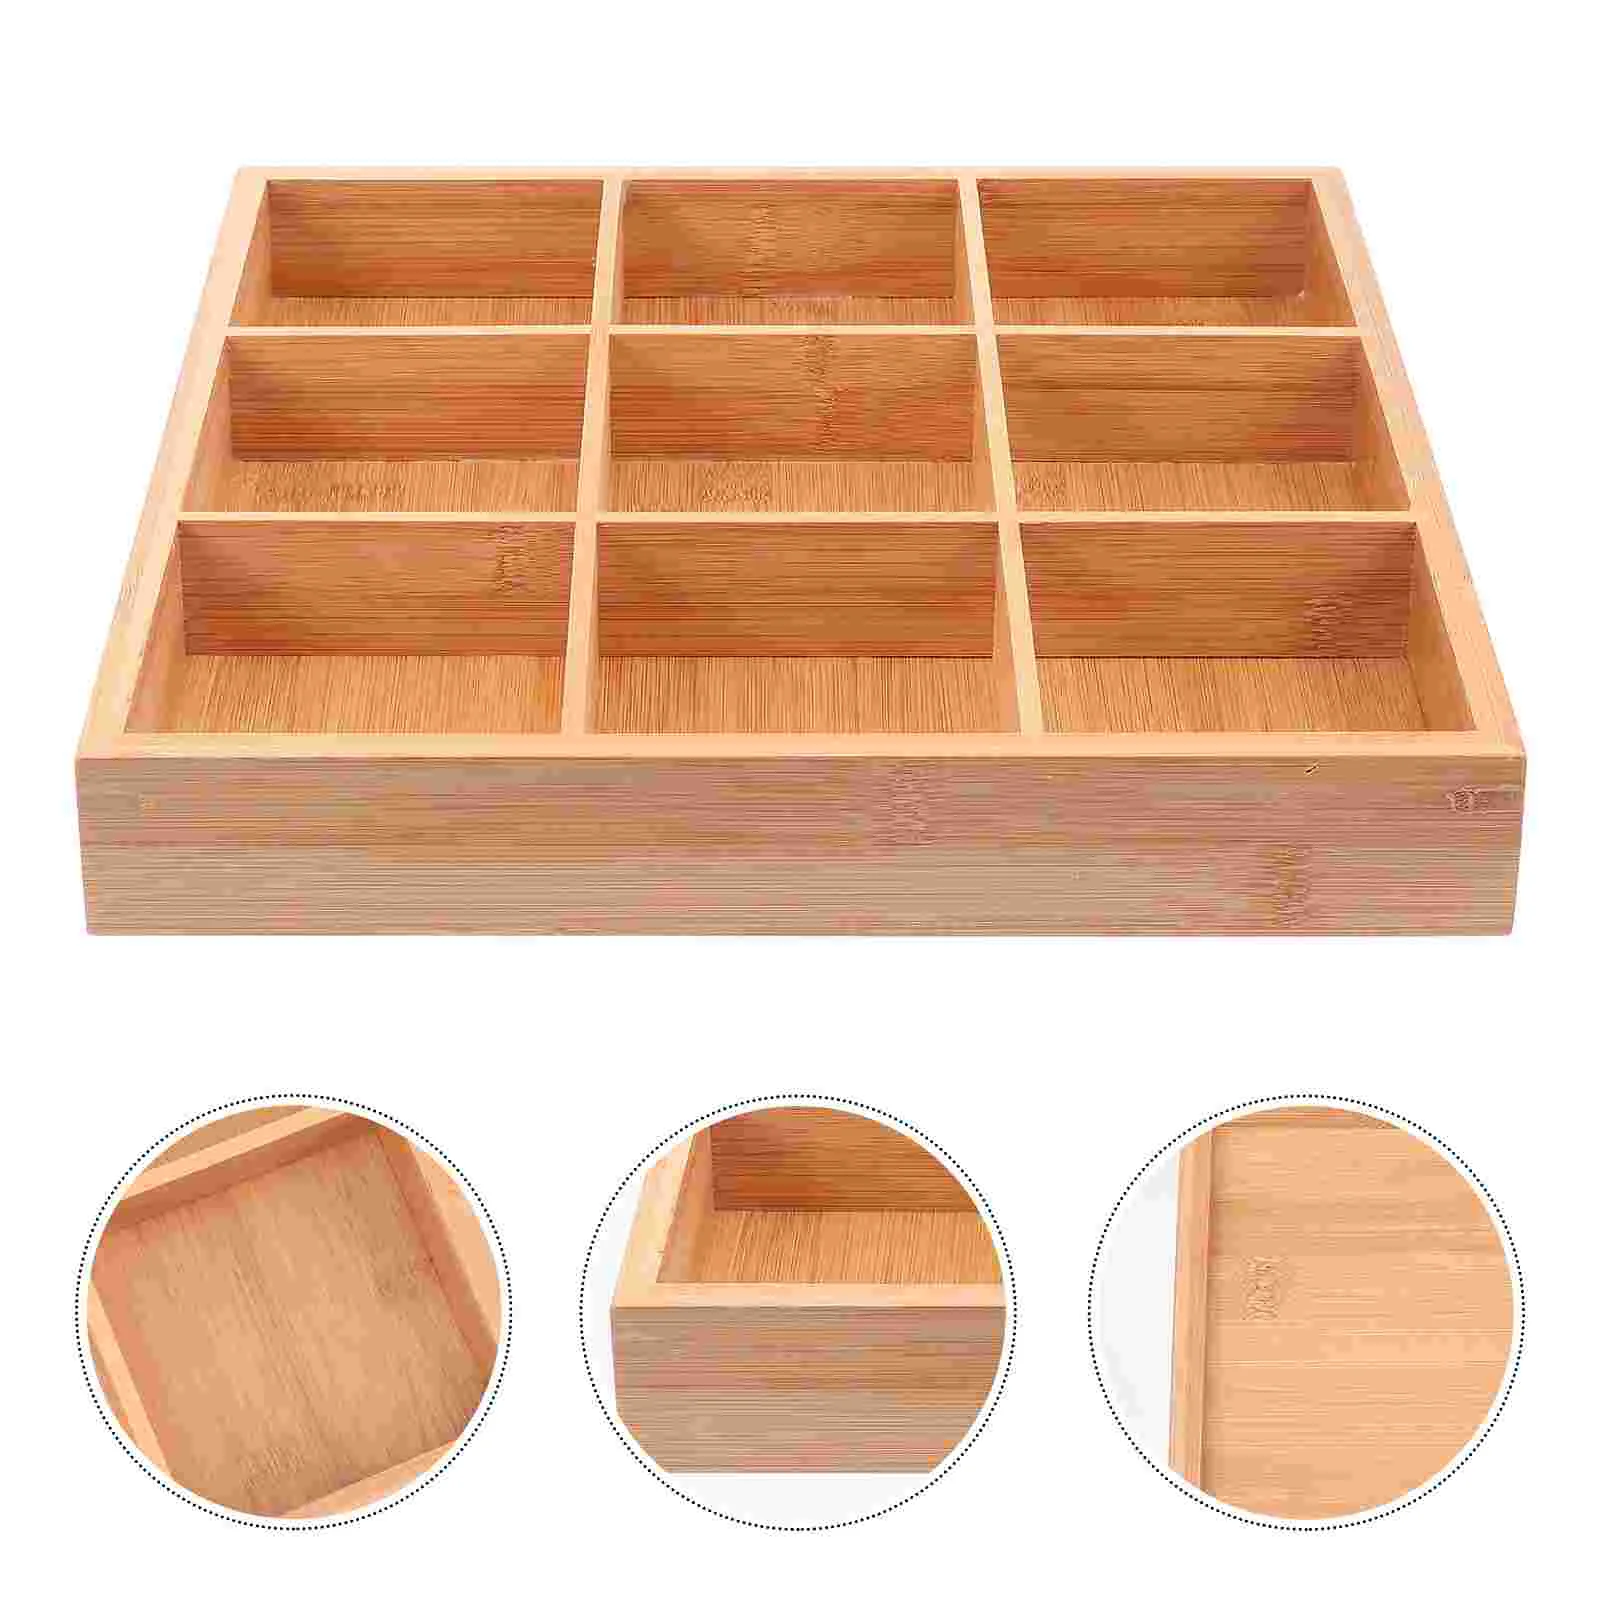 

Tray Serving Platter Divided Wood Sushi Bamboo Fruit Plate Wooden Food Trays Snack Plates Compartment Organizer Dishes Storage